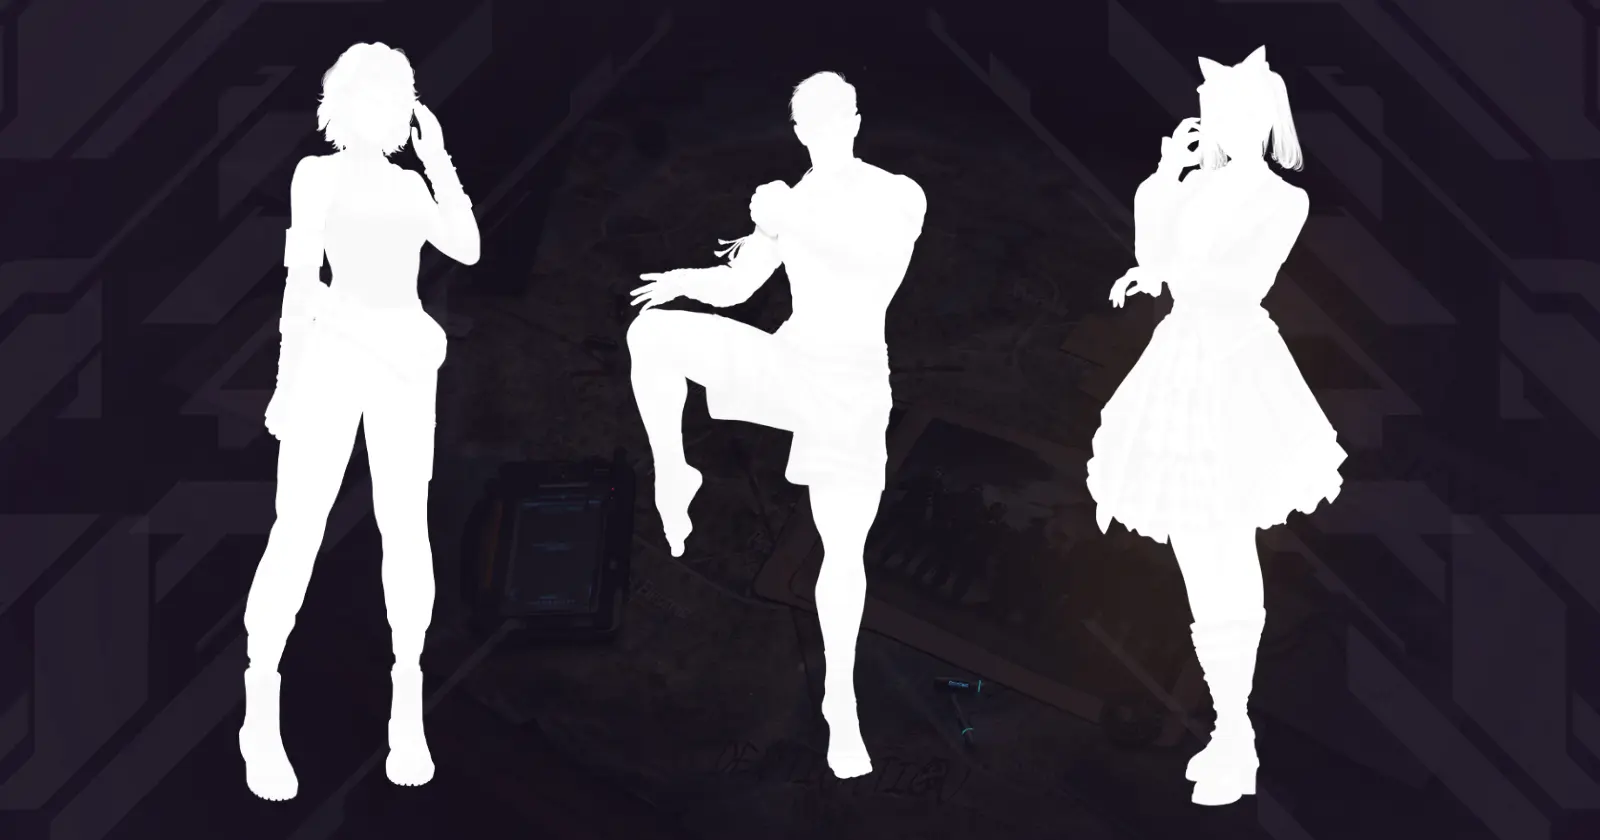 Three mysterious silhouettes performing on a dark, abstract background; each showcasing a different standing style